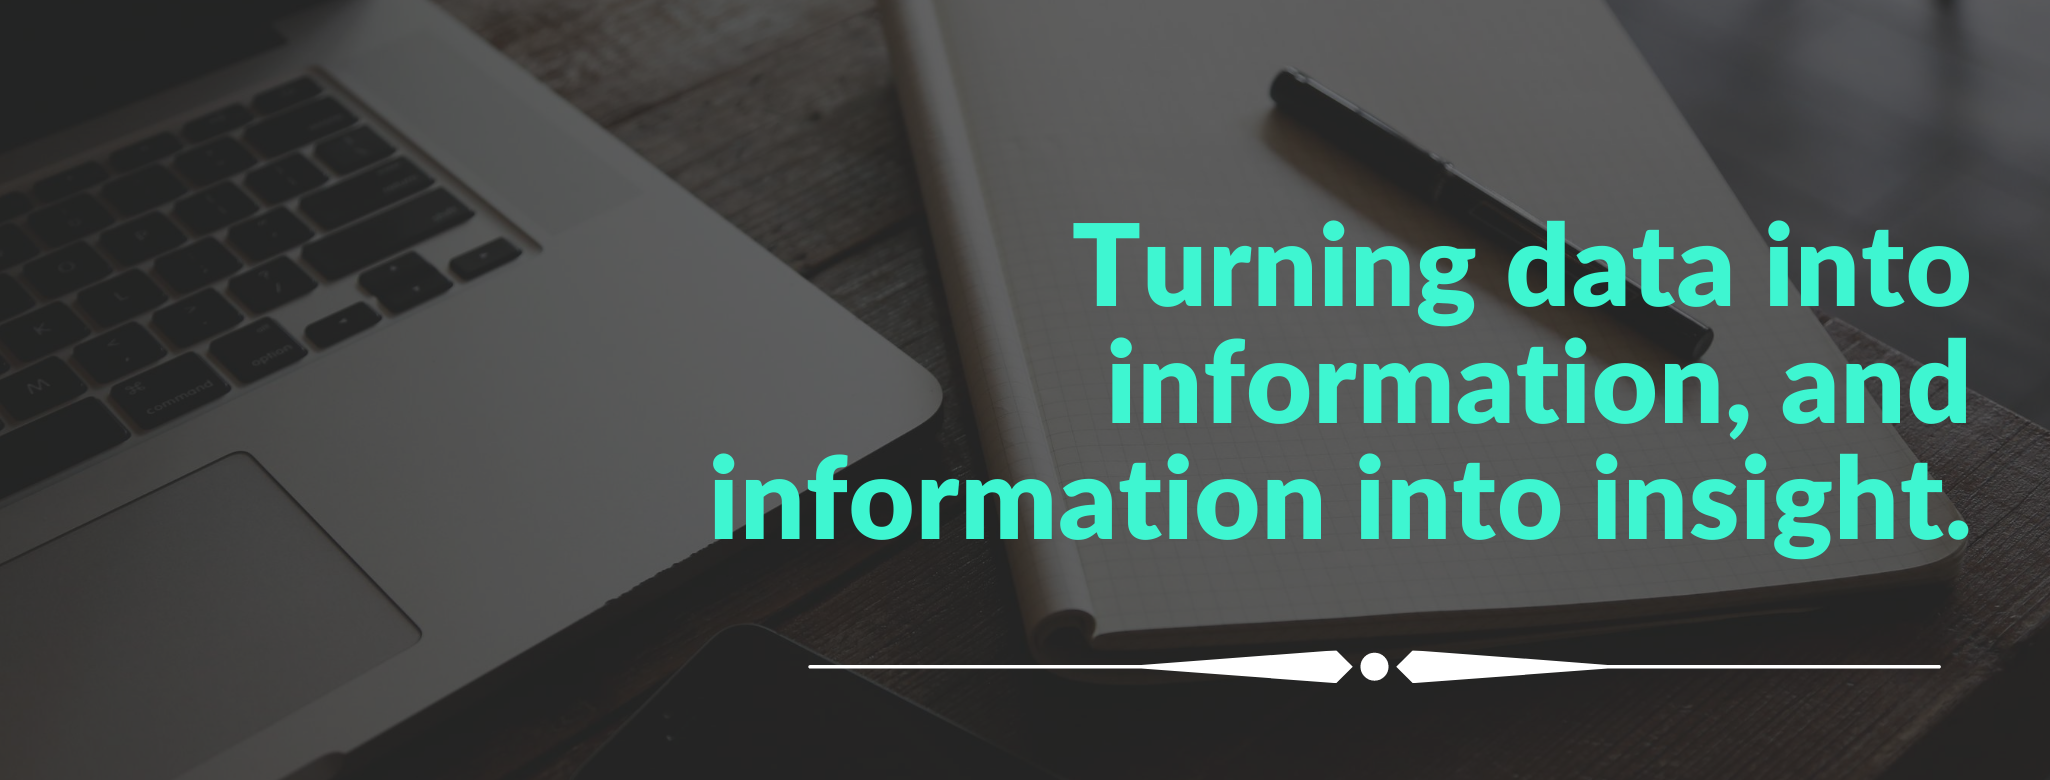 Turning data into information, and information into insight..png